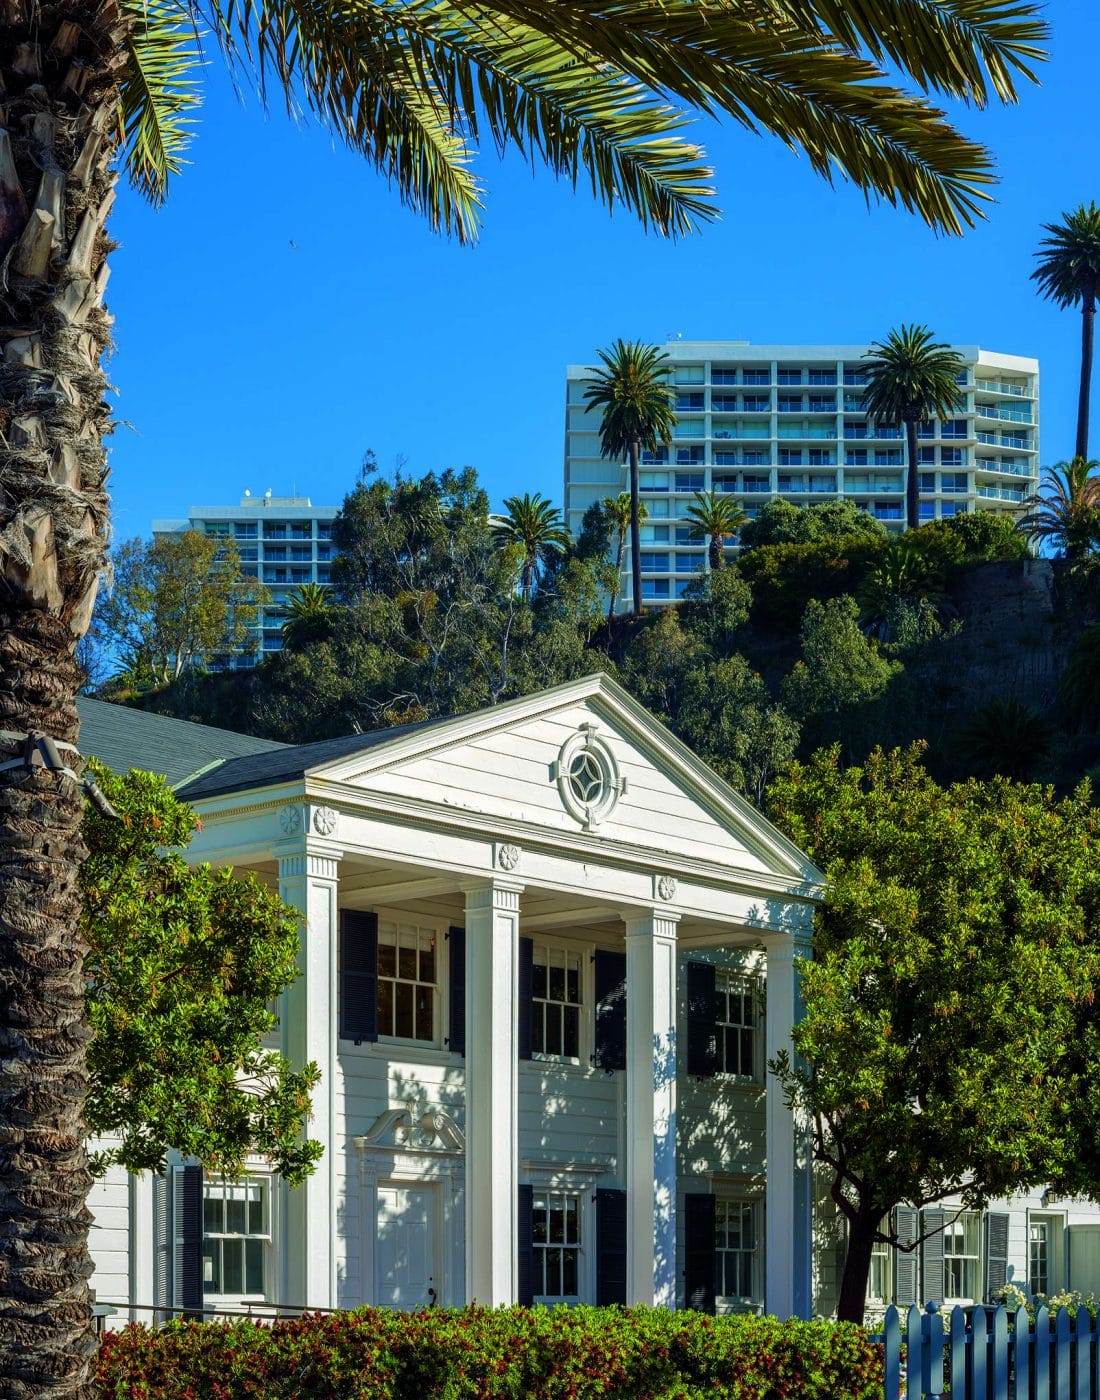 the neoclassical guest house north of Marion Davies’s Beach House